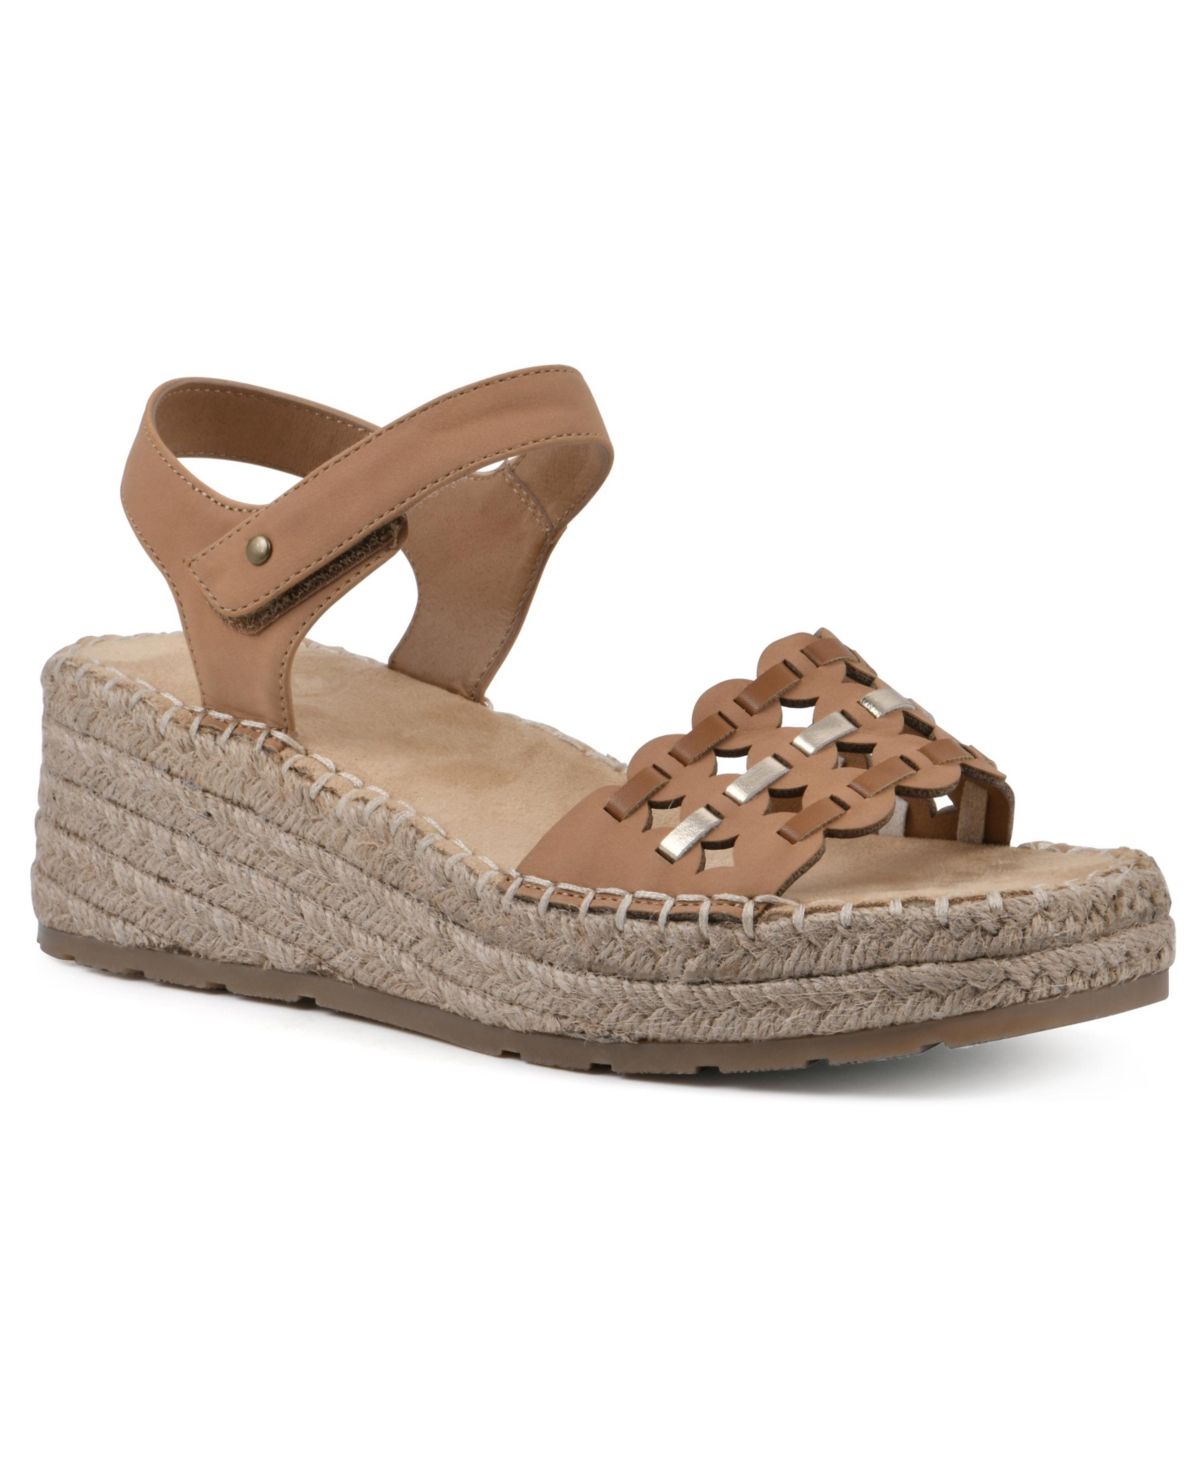 White Mountain Stride Espadrille Wedge Sandals In Tan Multi Smooth